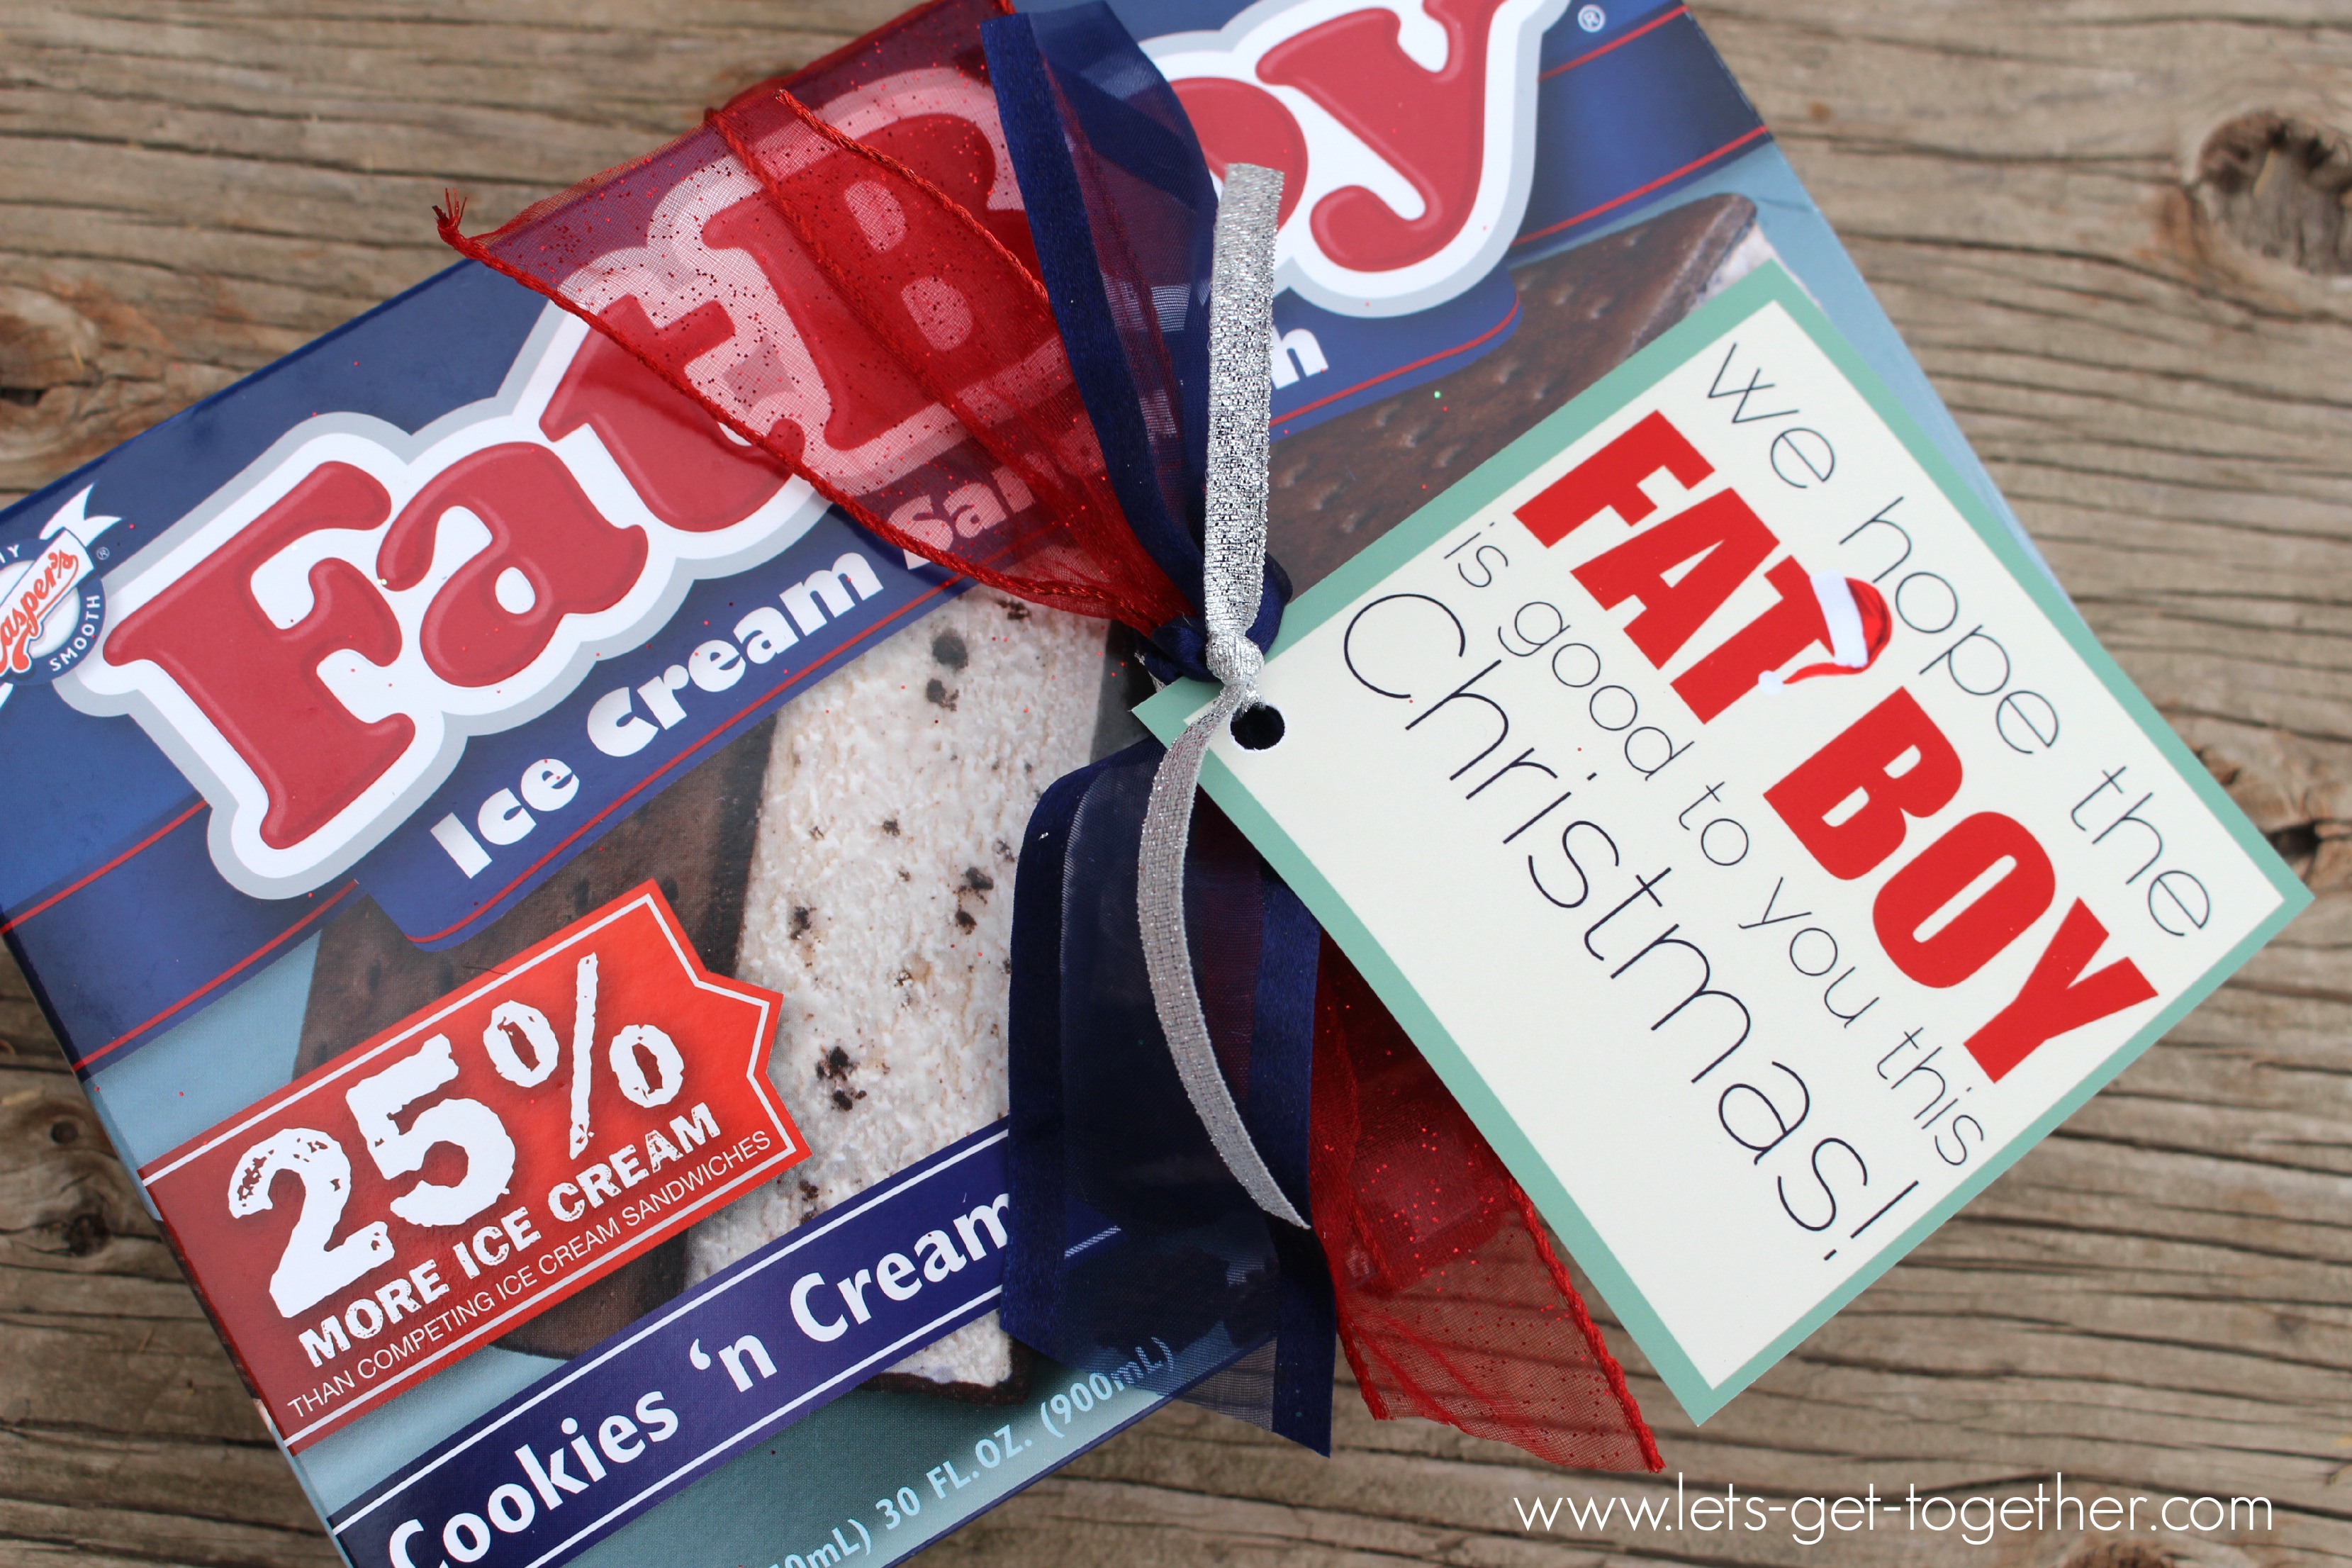 20 EASY, INEXPENSIVE and FAST Neighbor Christmas Gifts